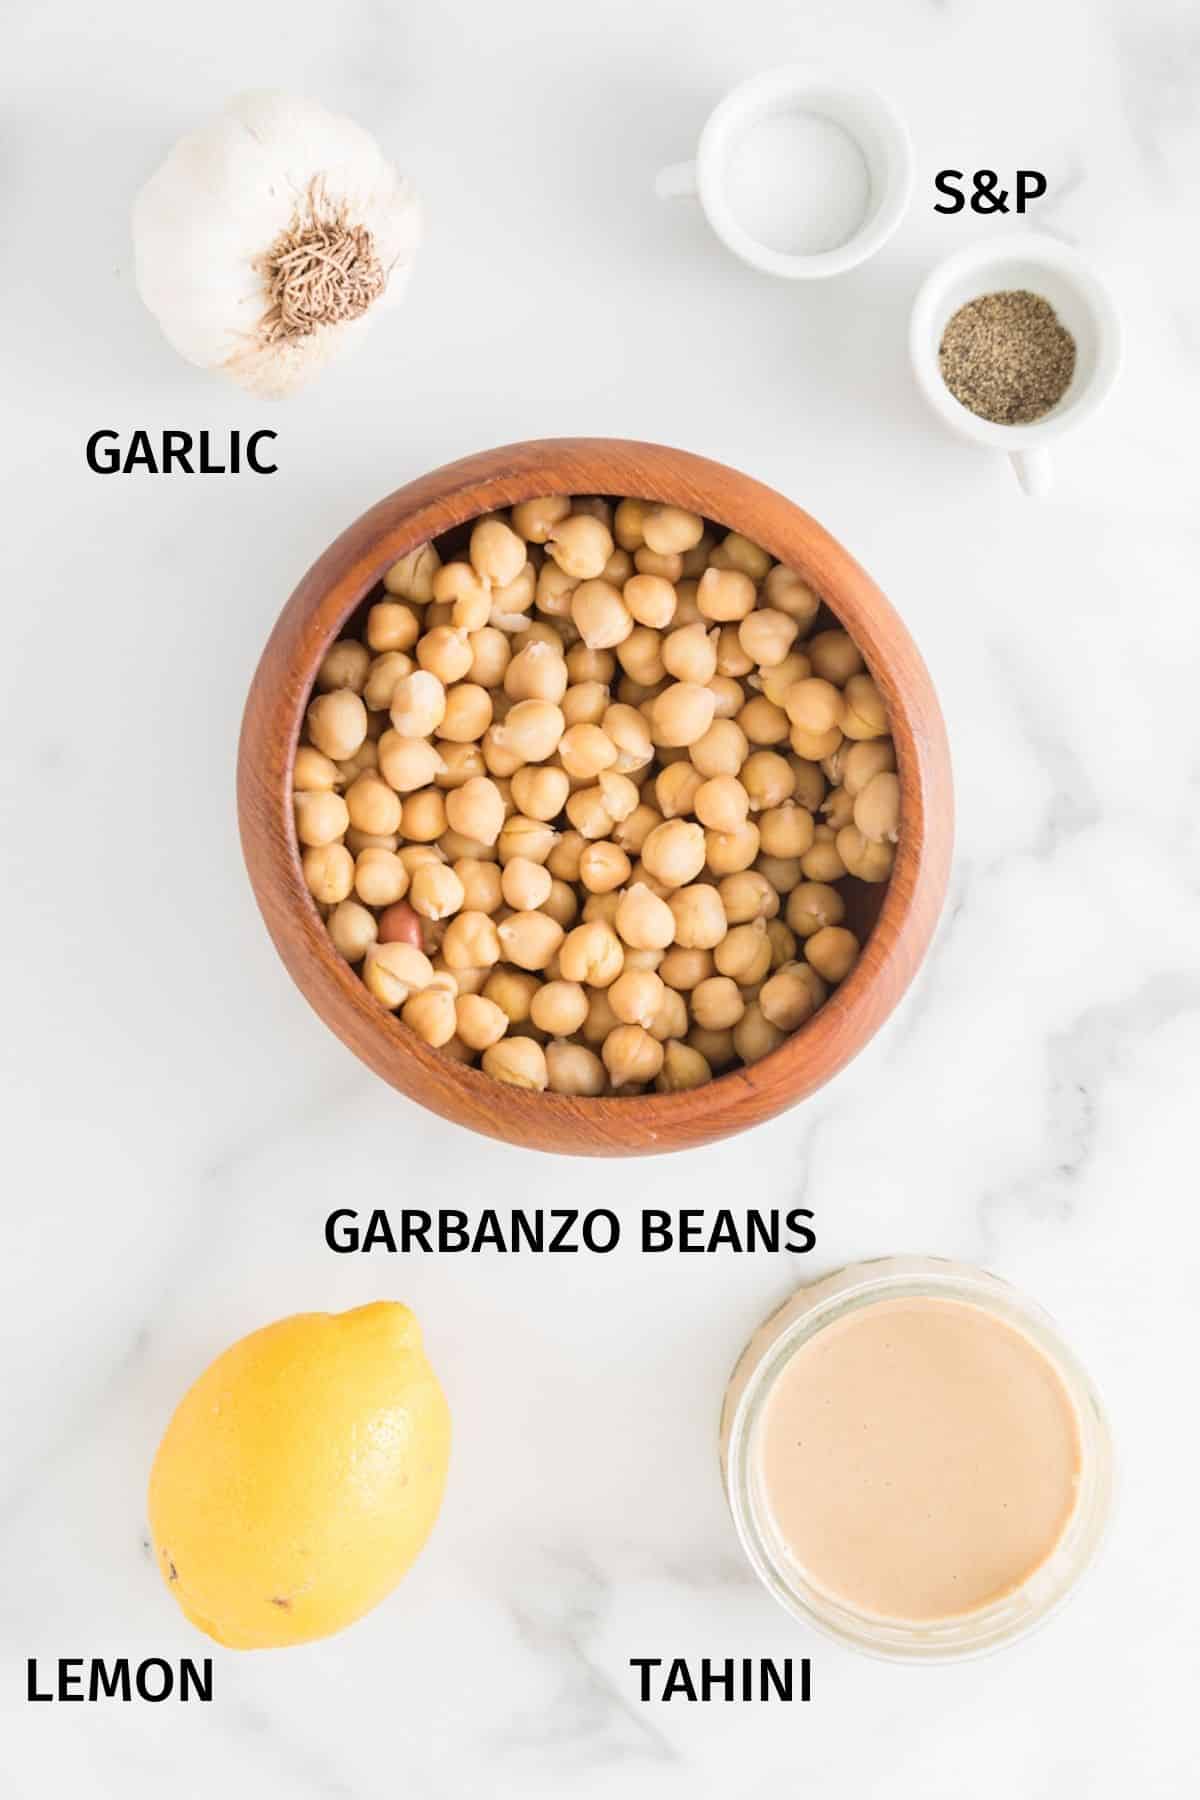 Ingredients to make oil-free hummus in small bowls on a white surface.